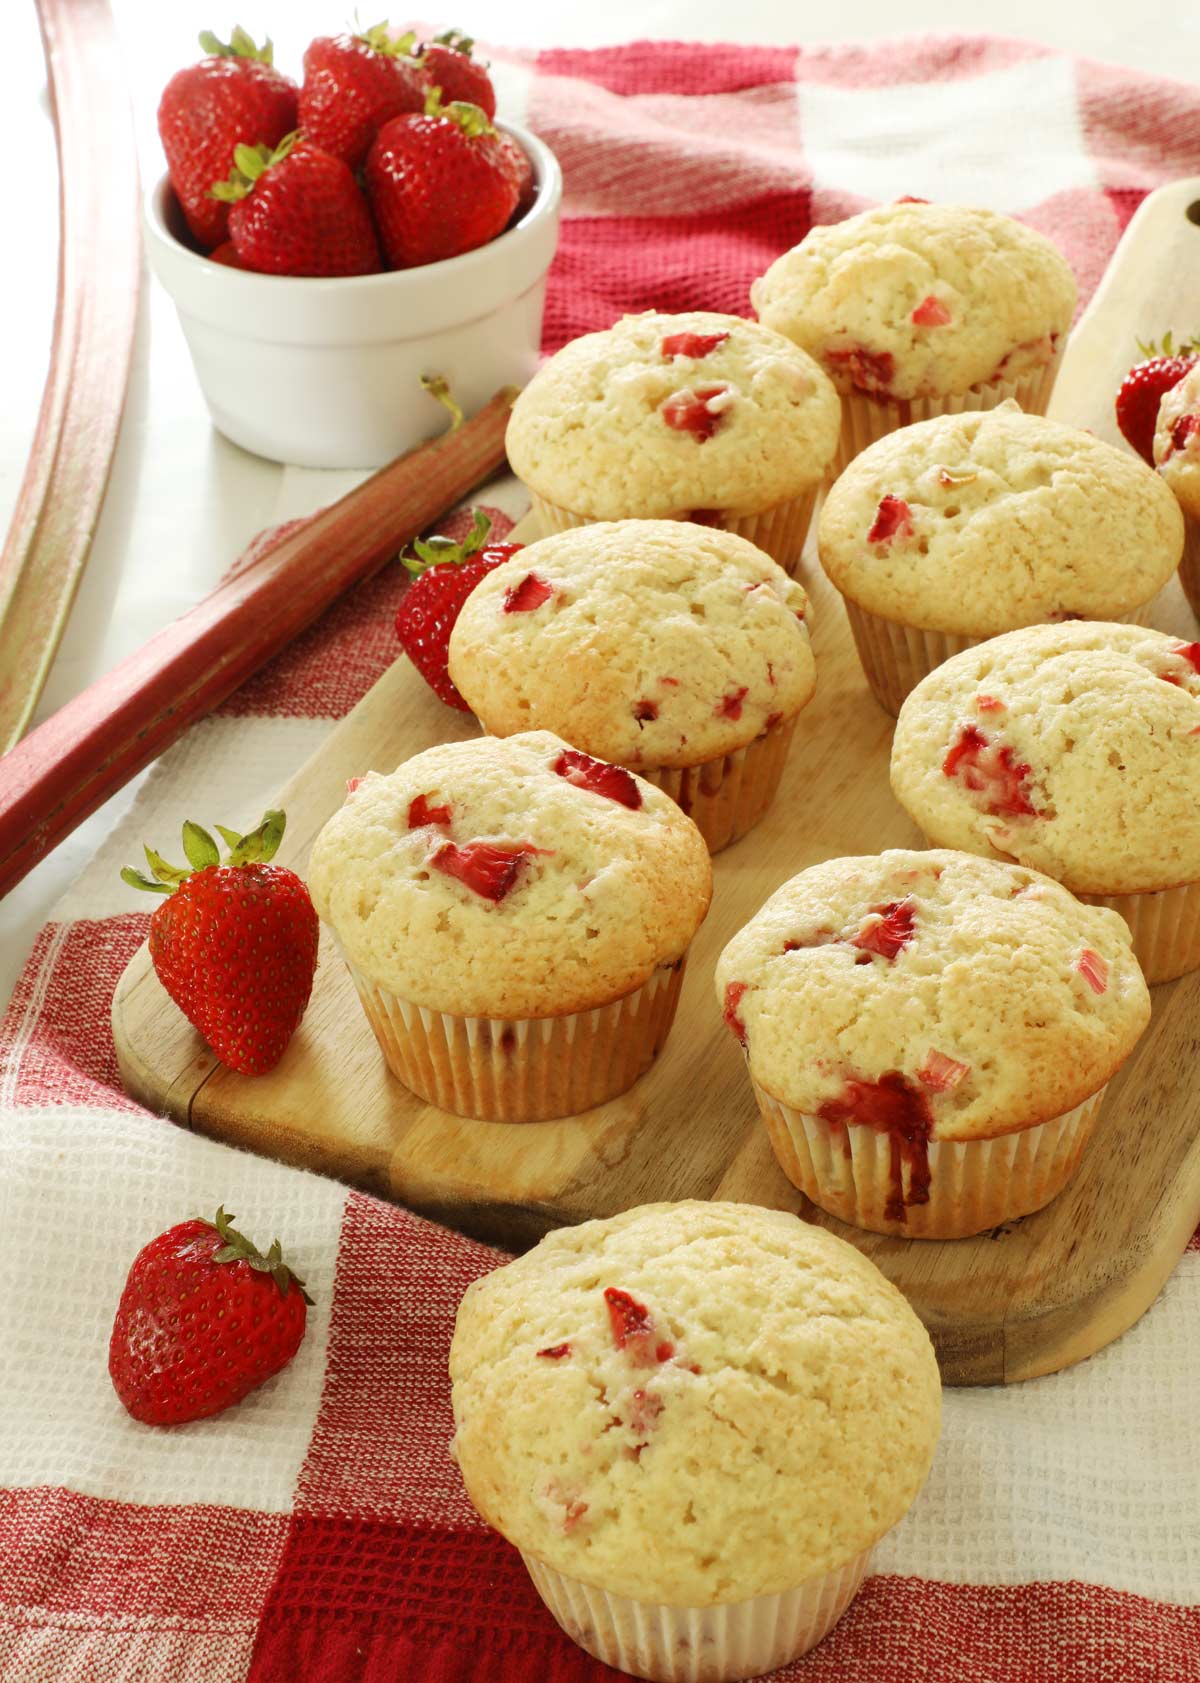 Strawberry Rhubarb Muffins on a cutting board atop a red and white kitchen towel.